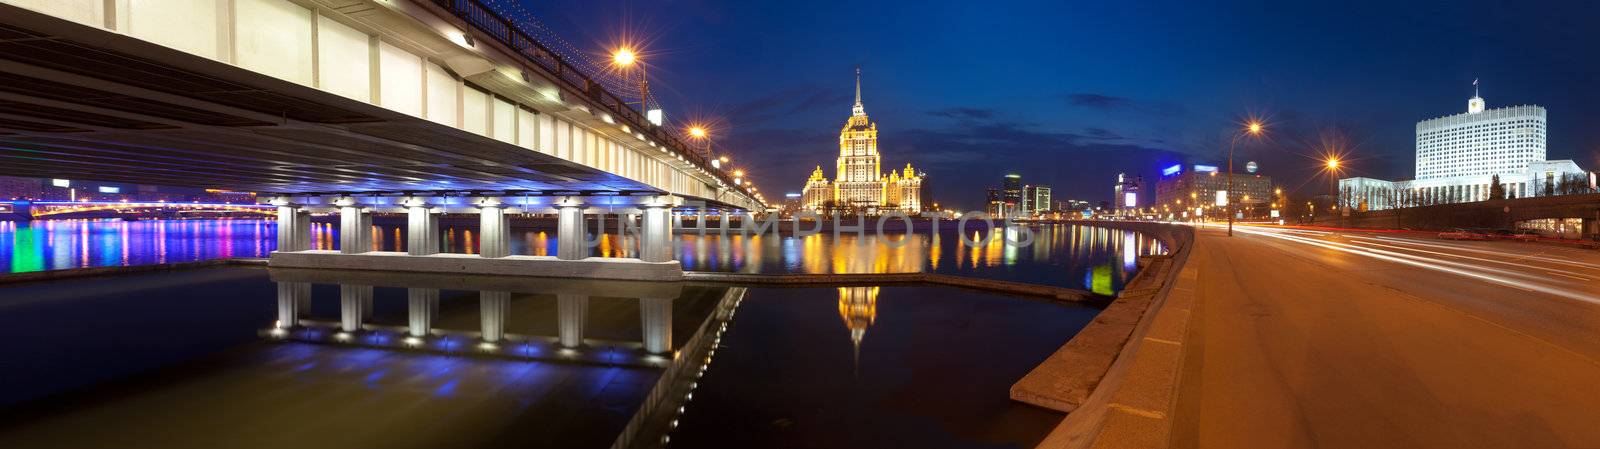 View  of the hotel Ukraine, the New Arbat bridge and the House of Government of Russian Federation (the Russian White House) from  Krasnopresnenskaya quay. Panorama.